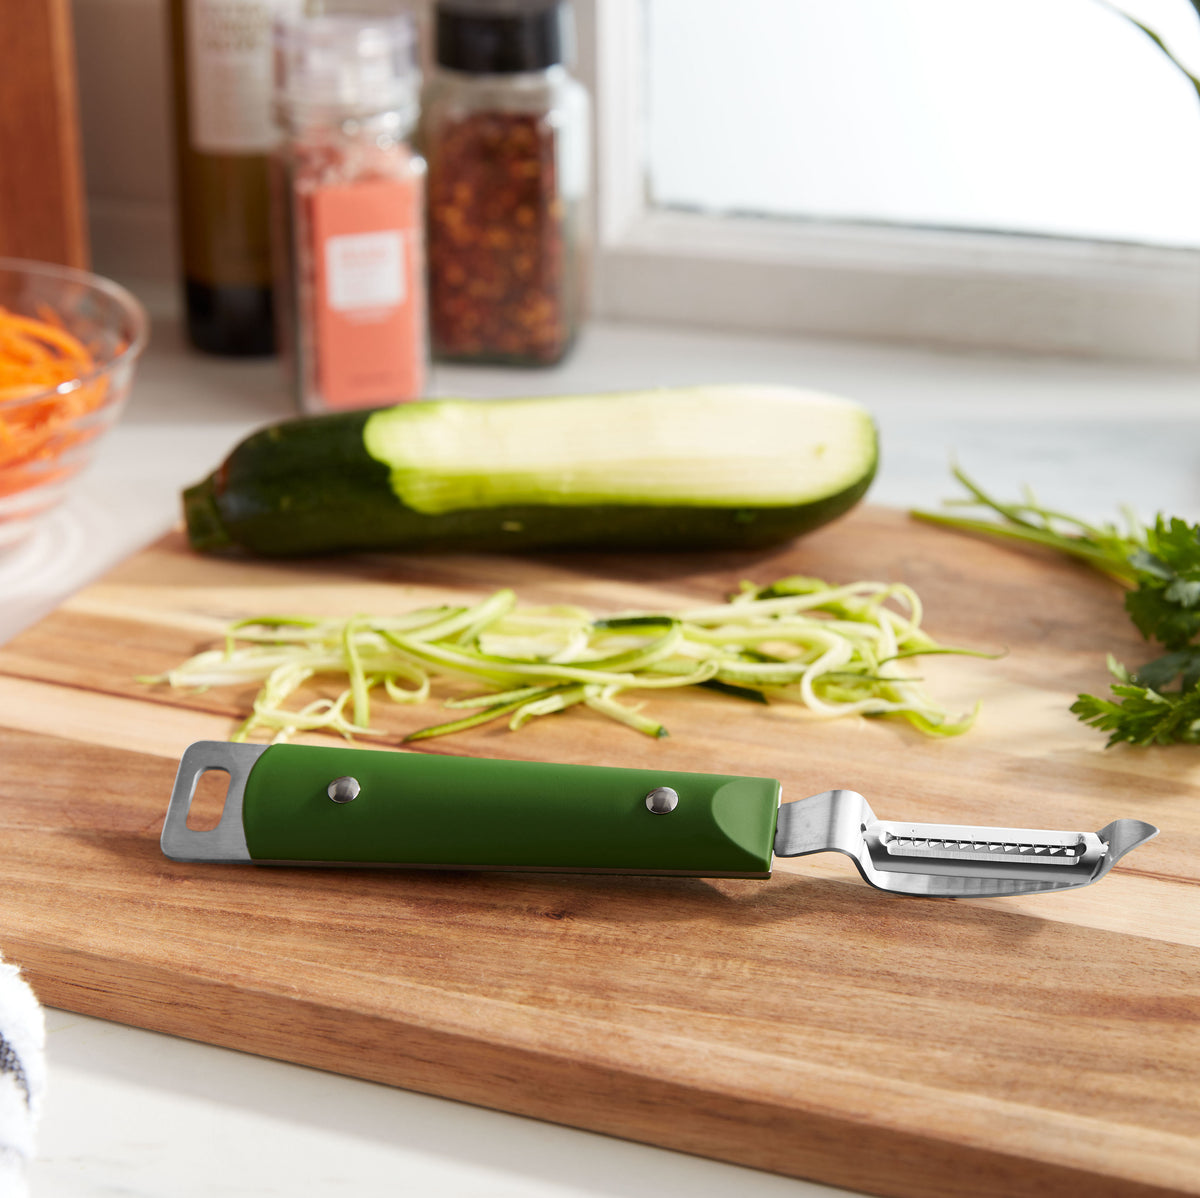 Lifestyle photo showing green-handled julienne peeler on a cutting board next to a zuchinni with fresh zoodles having been effortlessly just created.